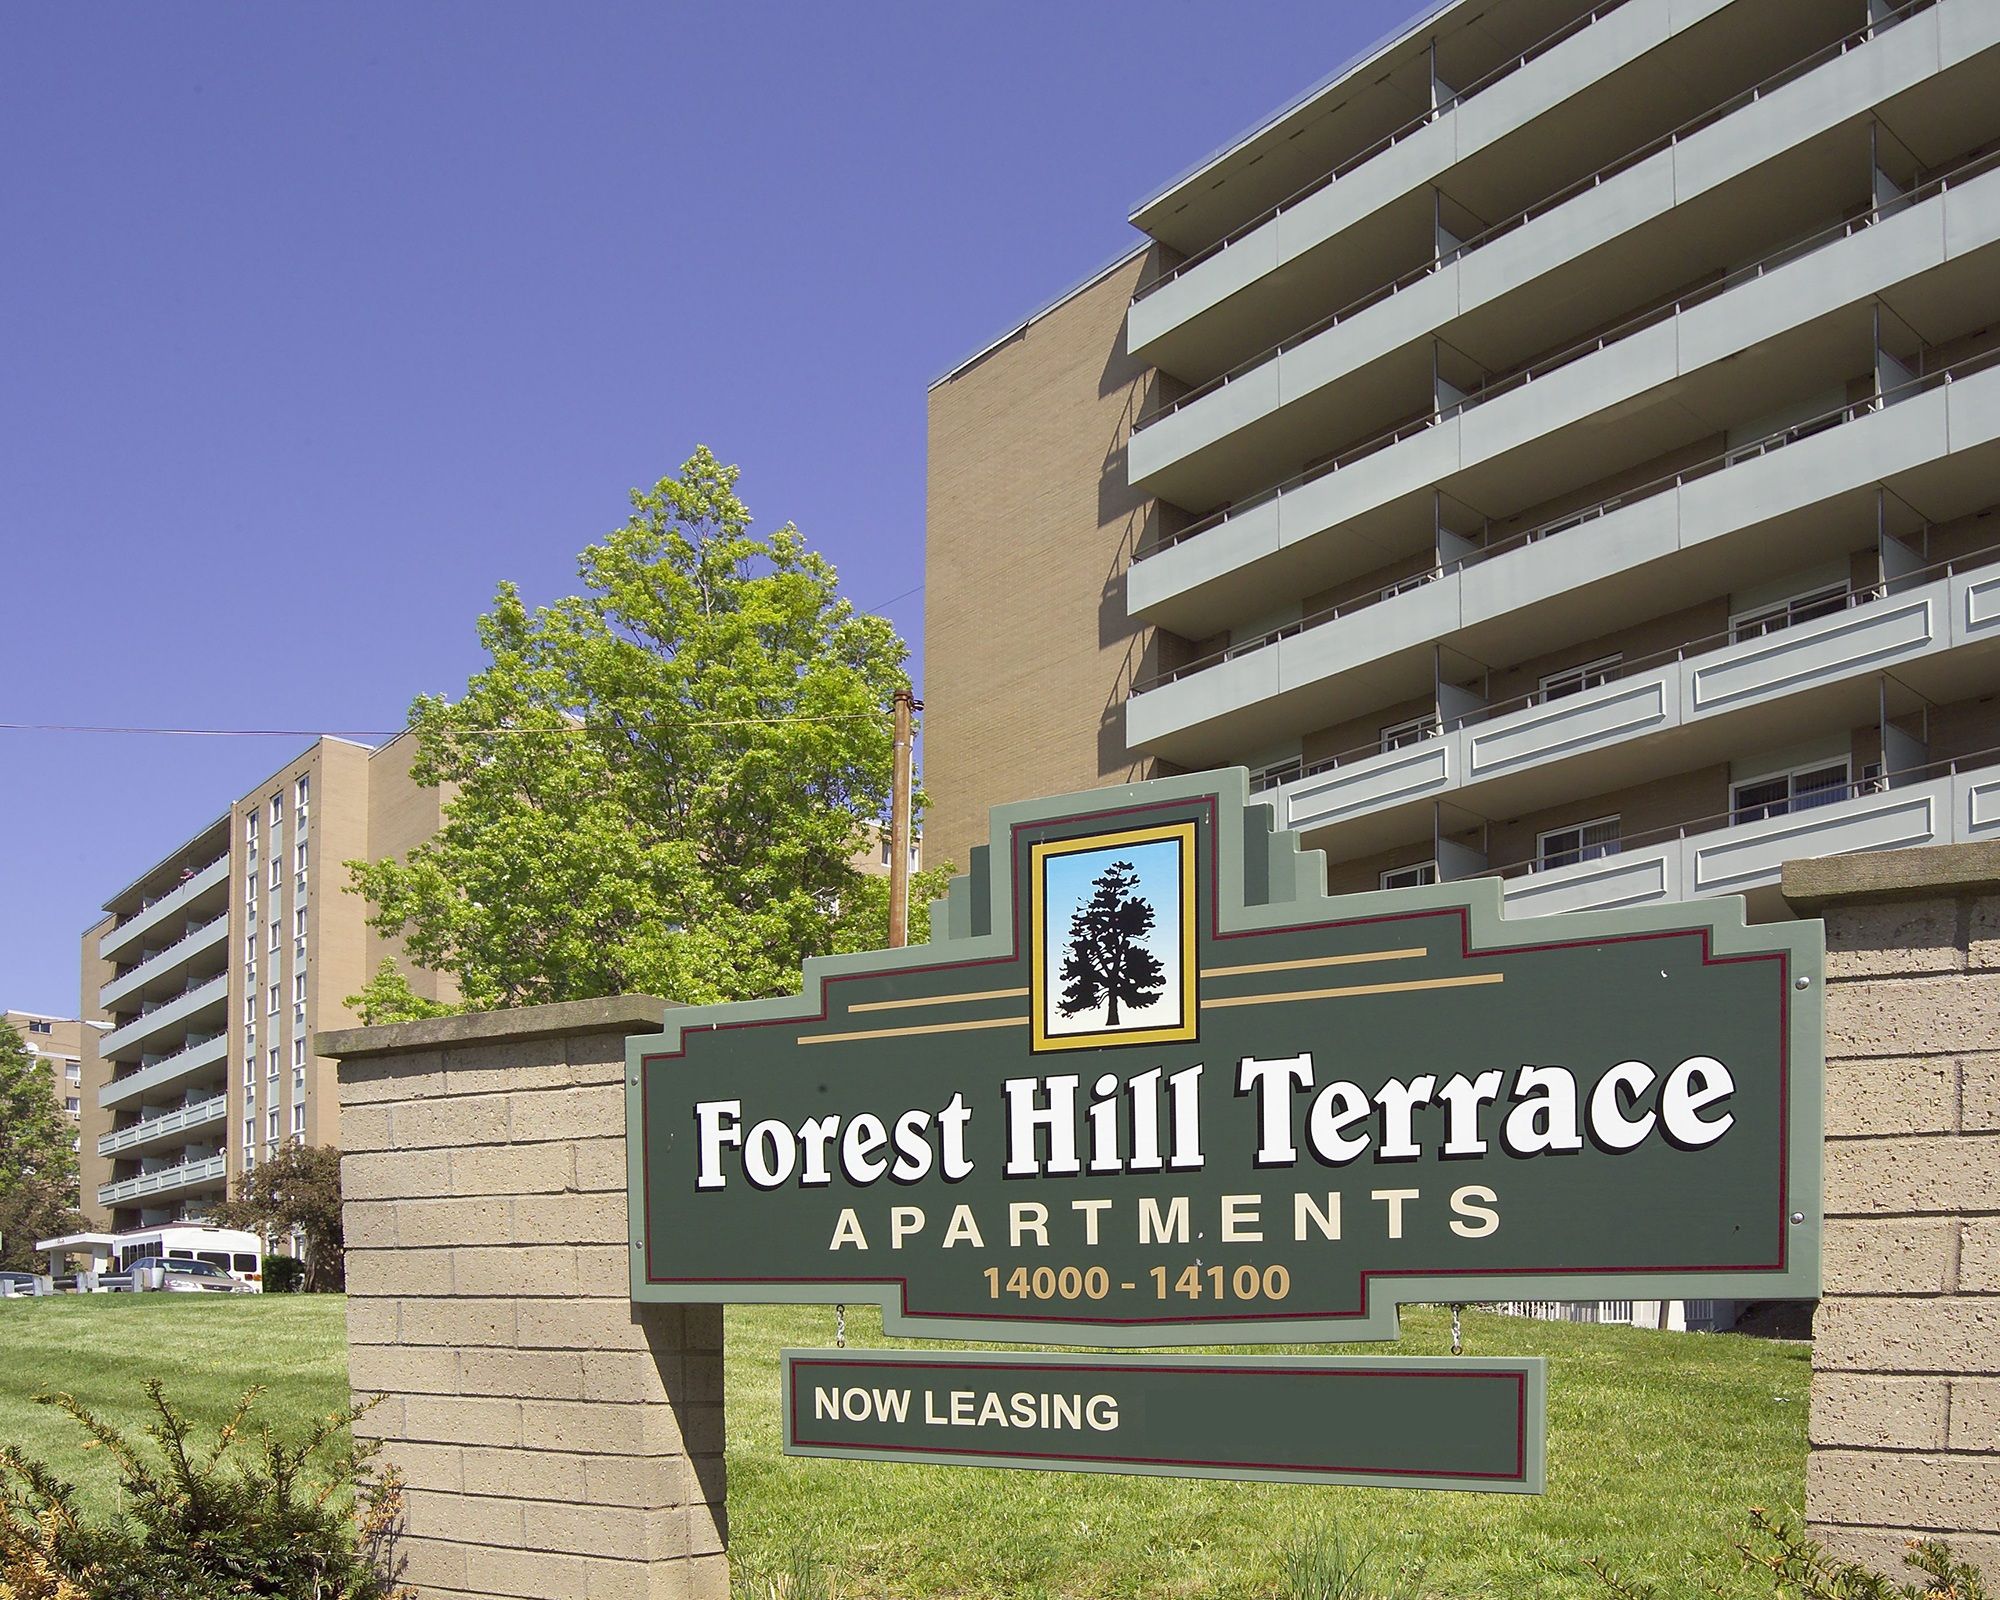 Foresthill Terrace